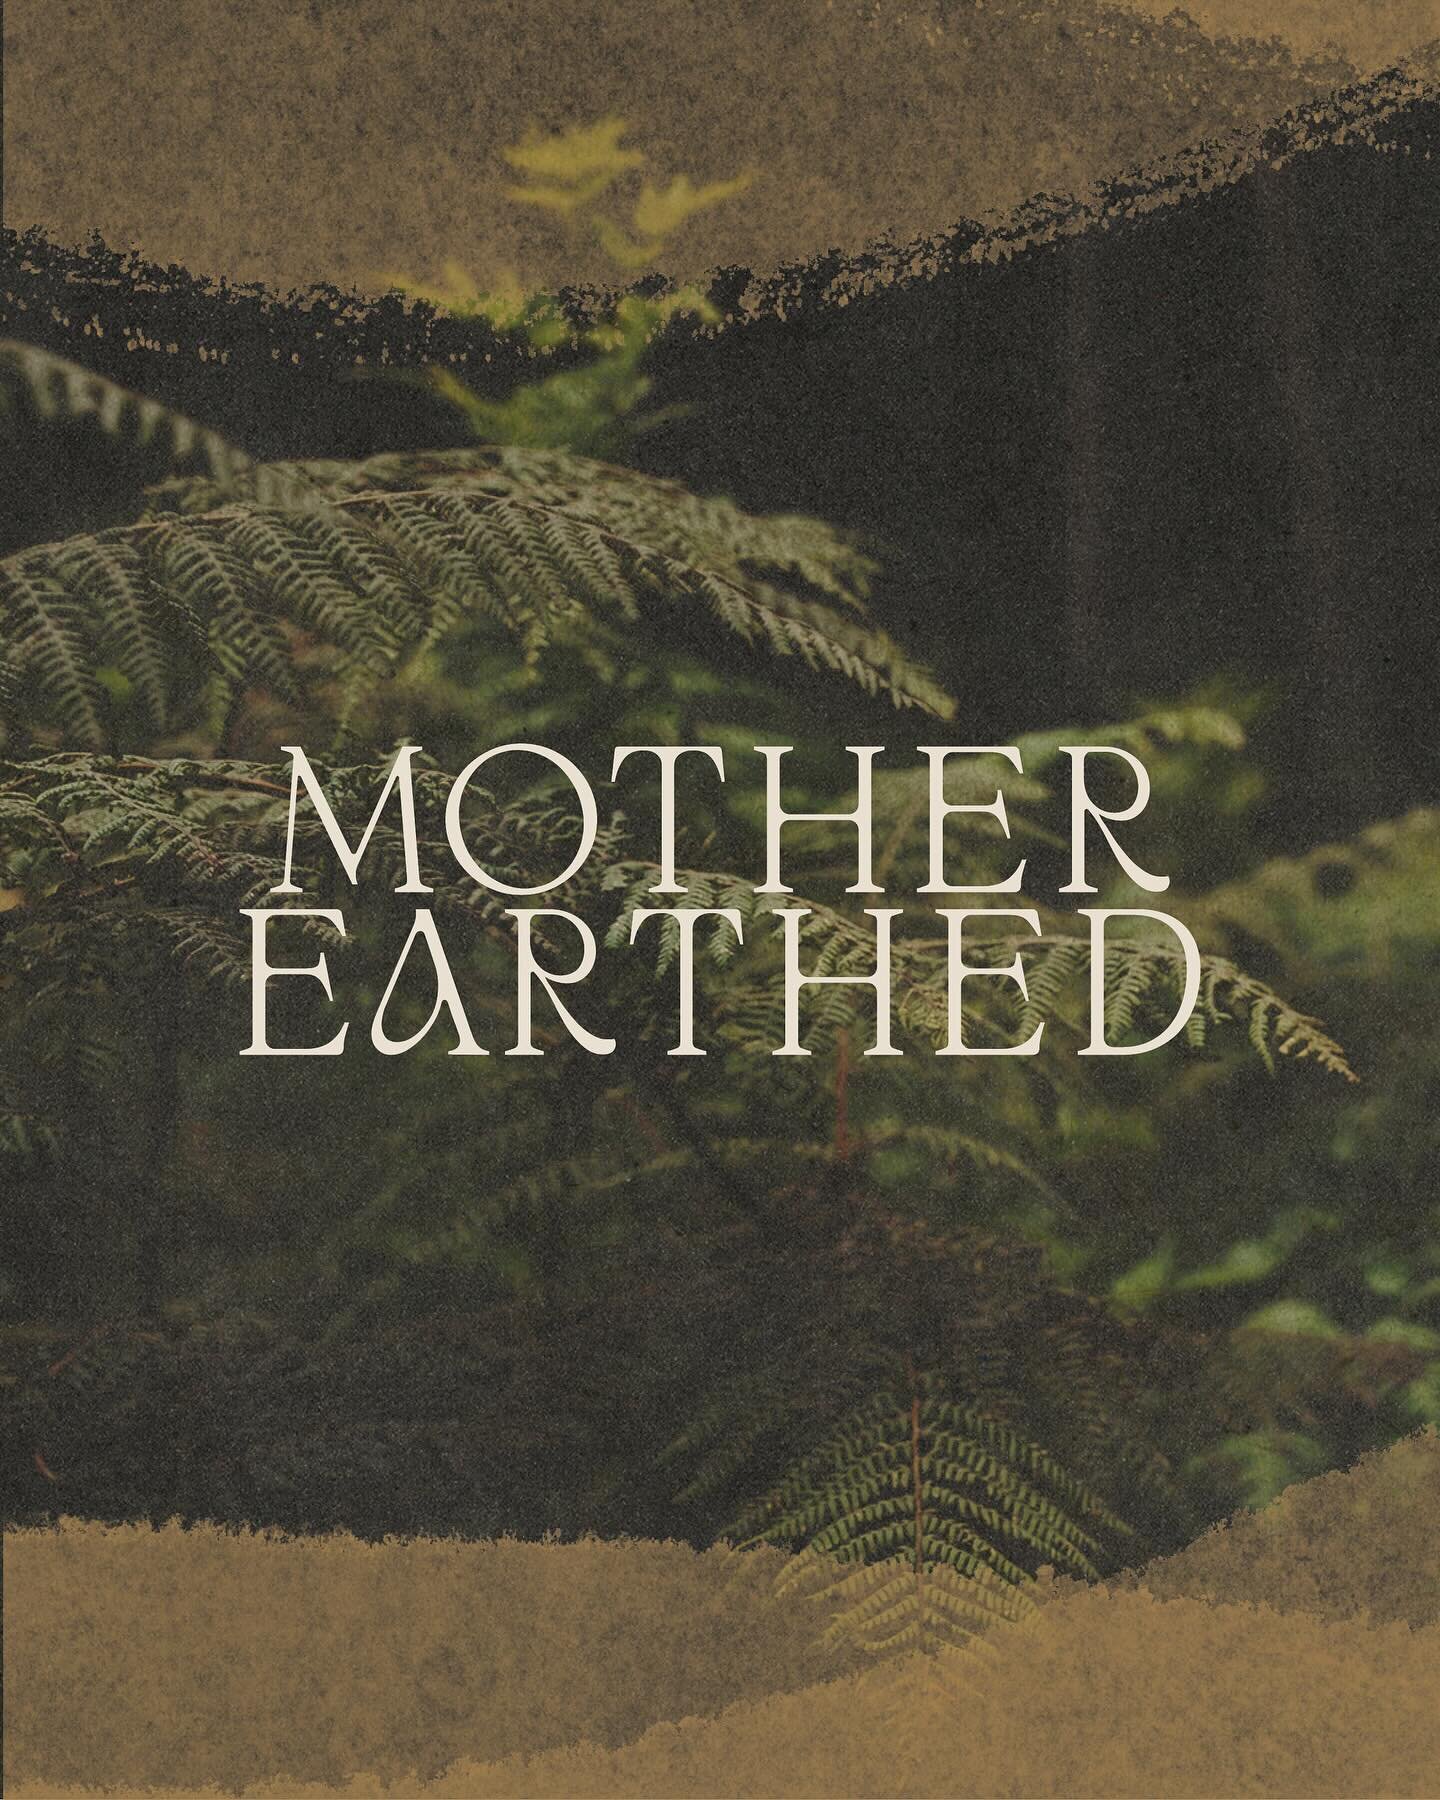 Branding created recently for Mother Earthed &ndash; a nature-based occupational therapy service for children. Through incorporating the healing powers of the natural environment, Mother Earthed endeavours to deliver a goal-orientated, back-to-basics